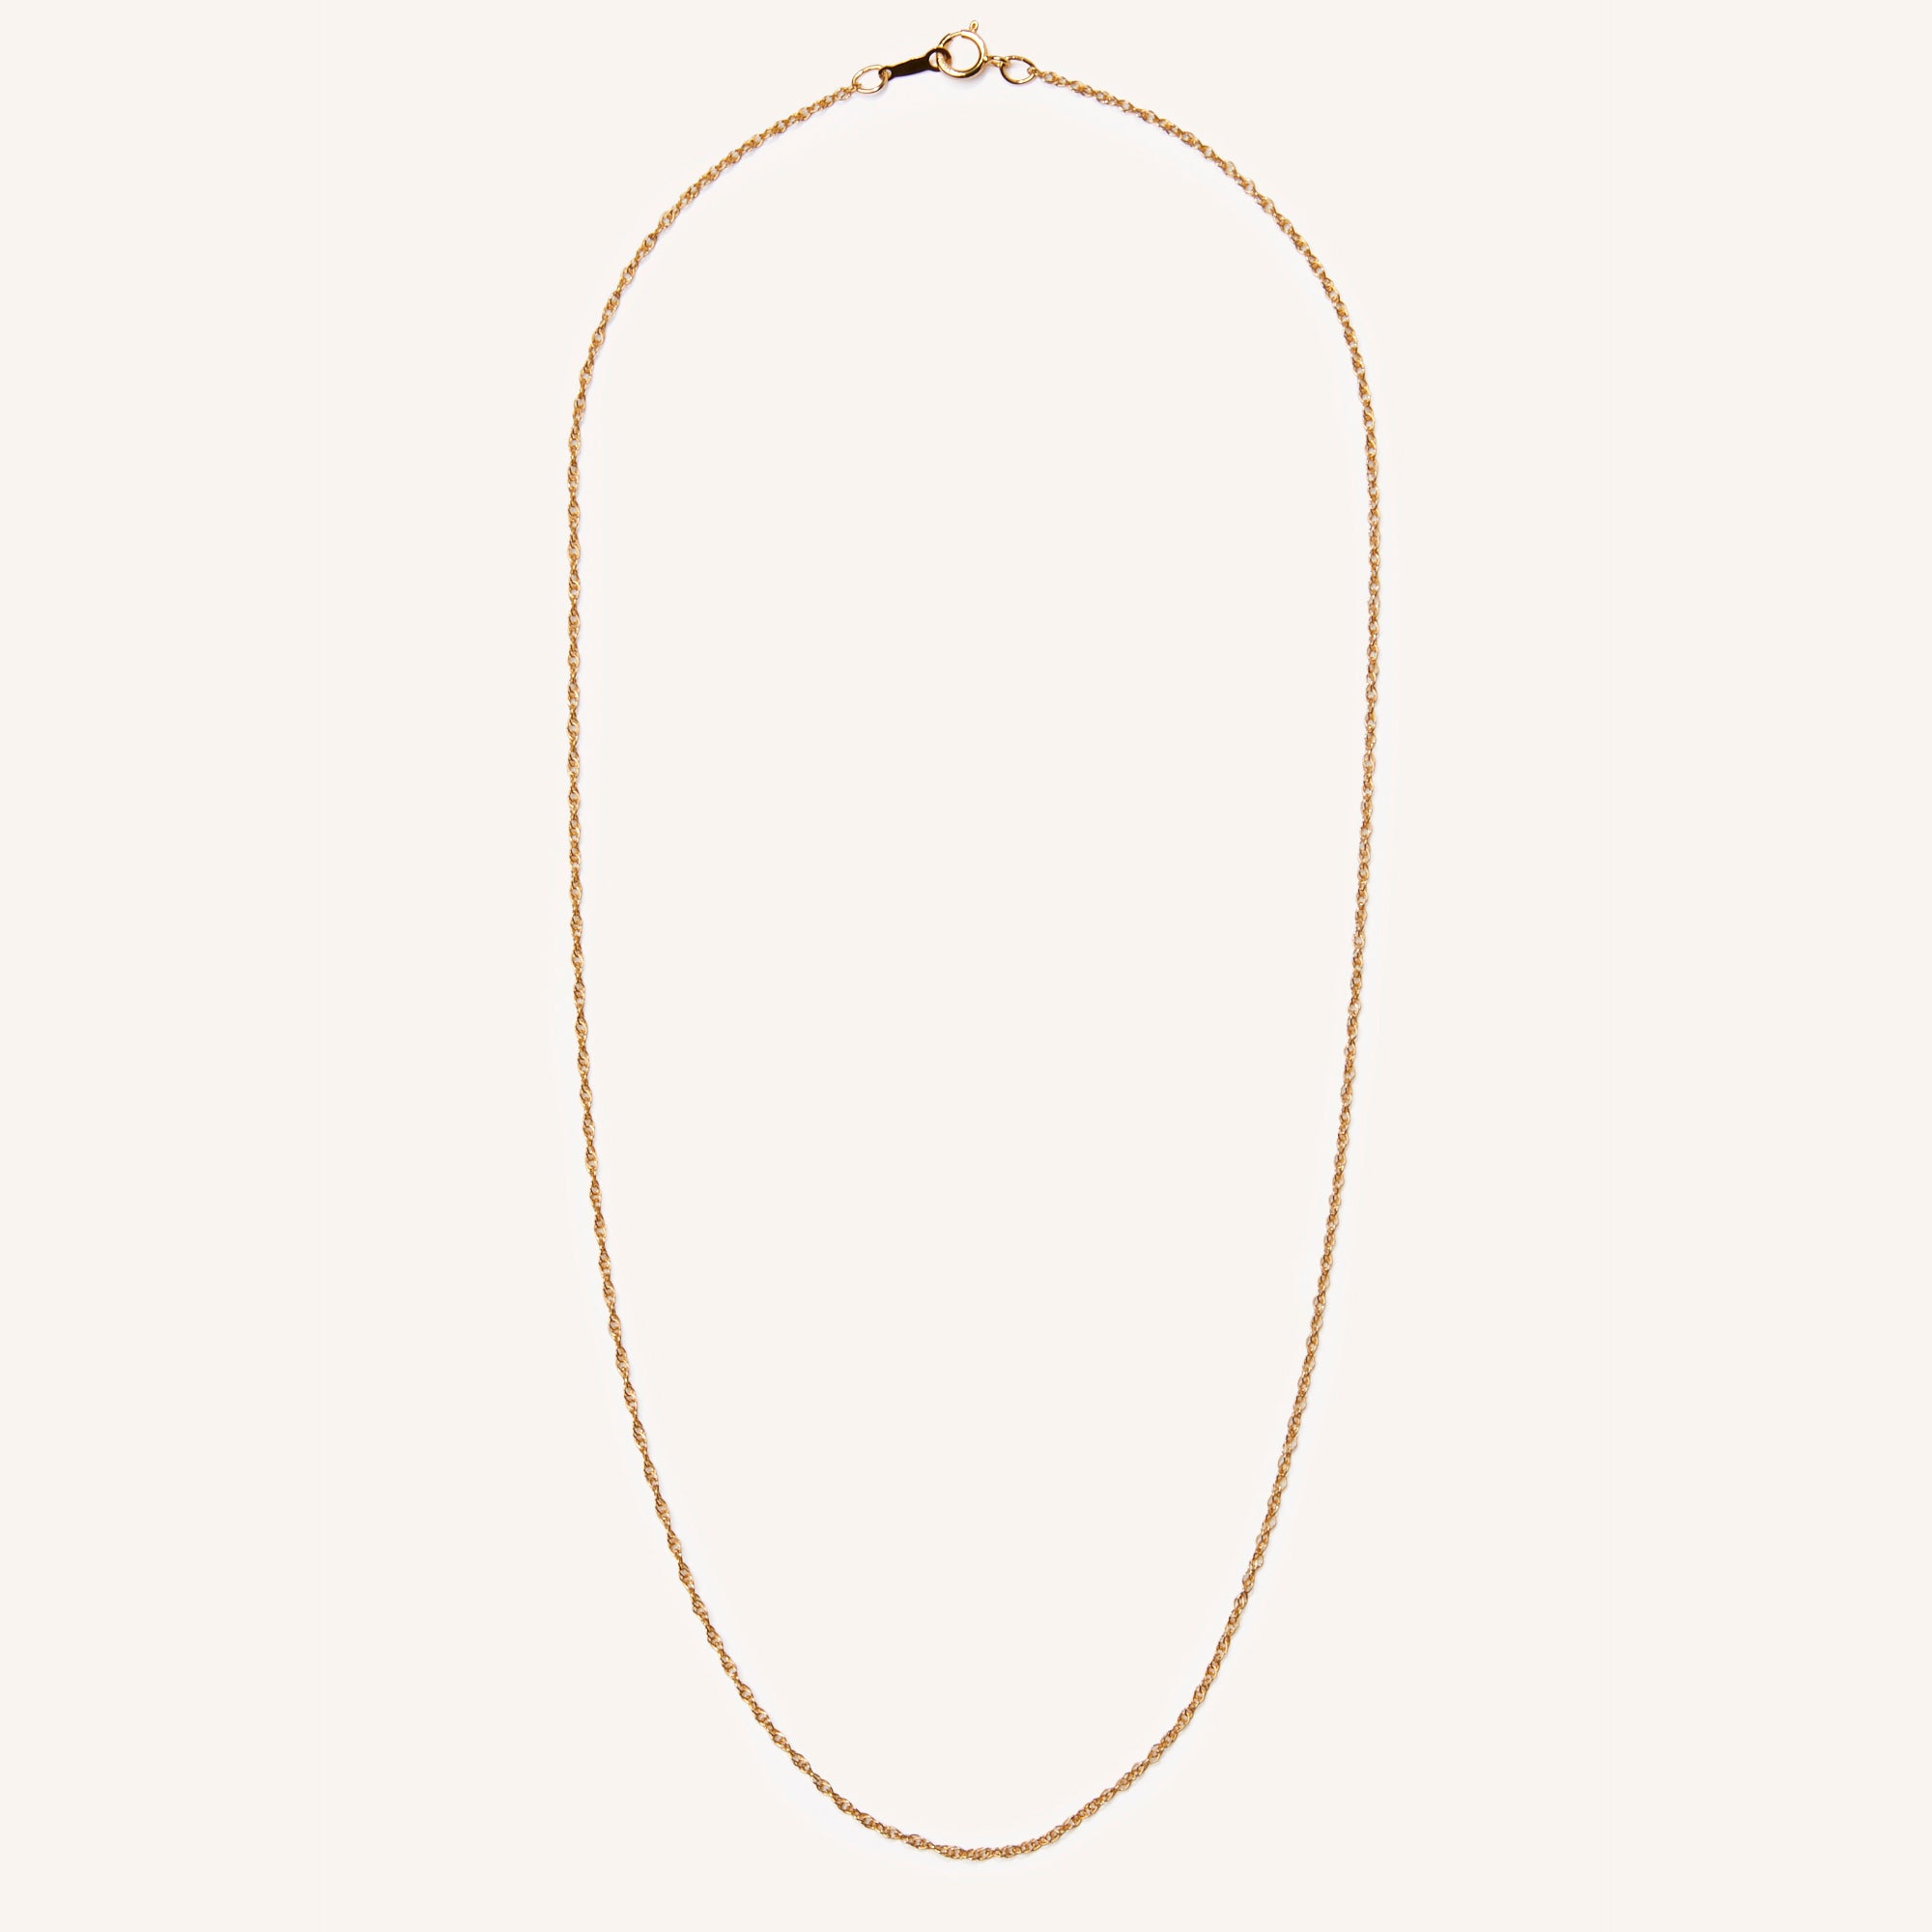 C.W. James Bianca gold rope chain necklace